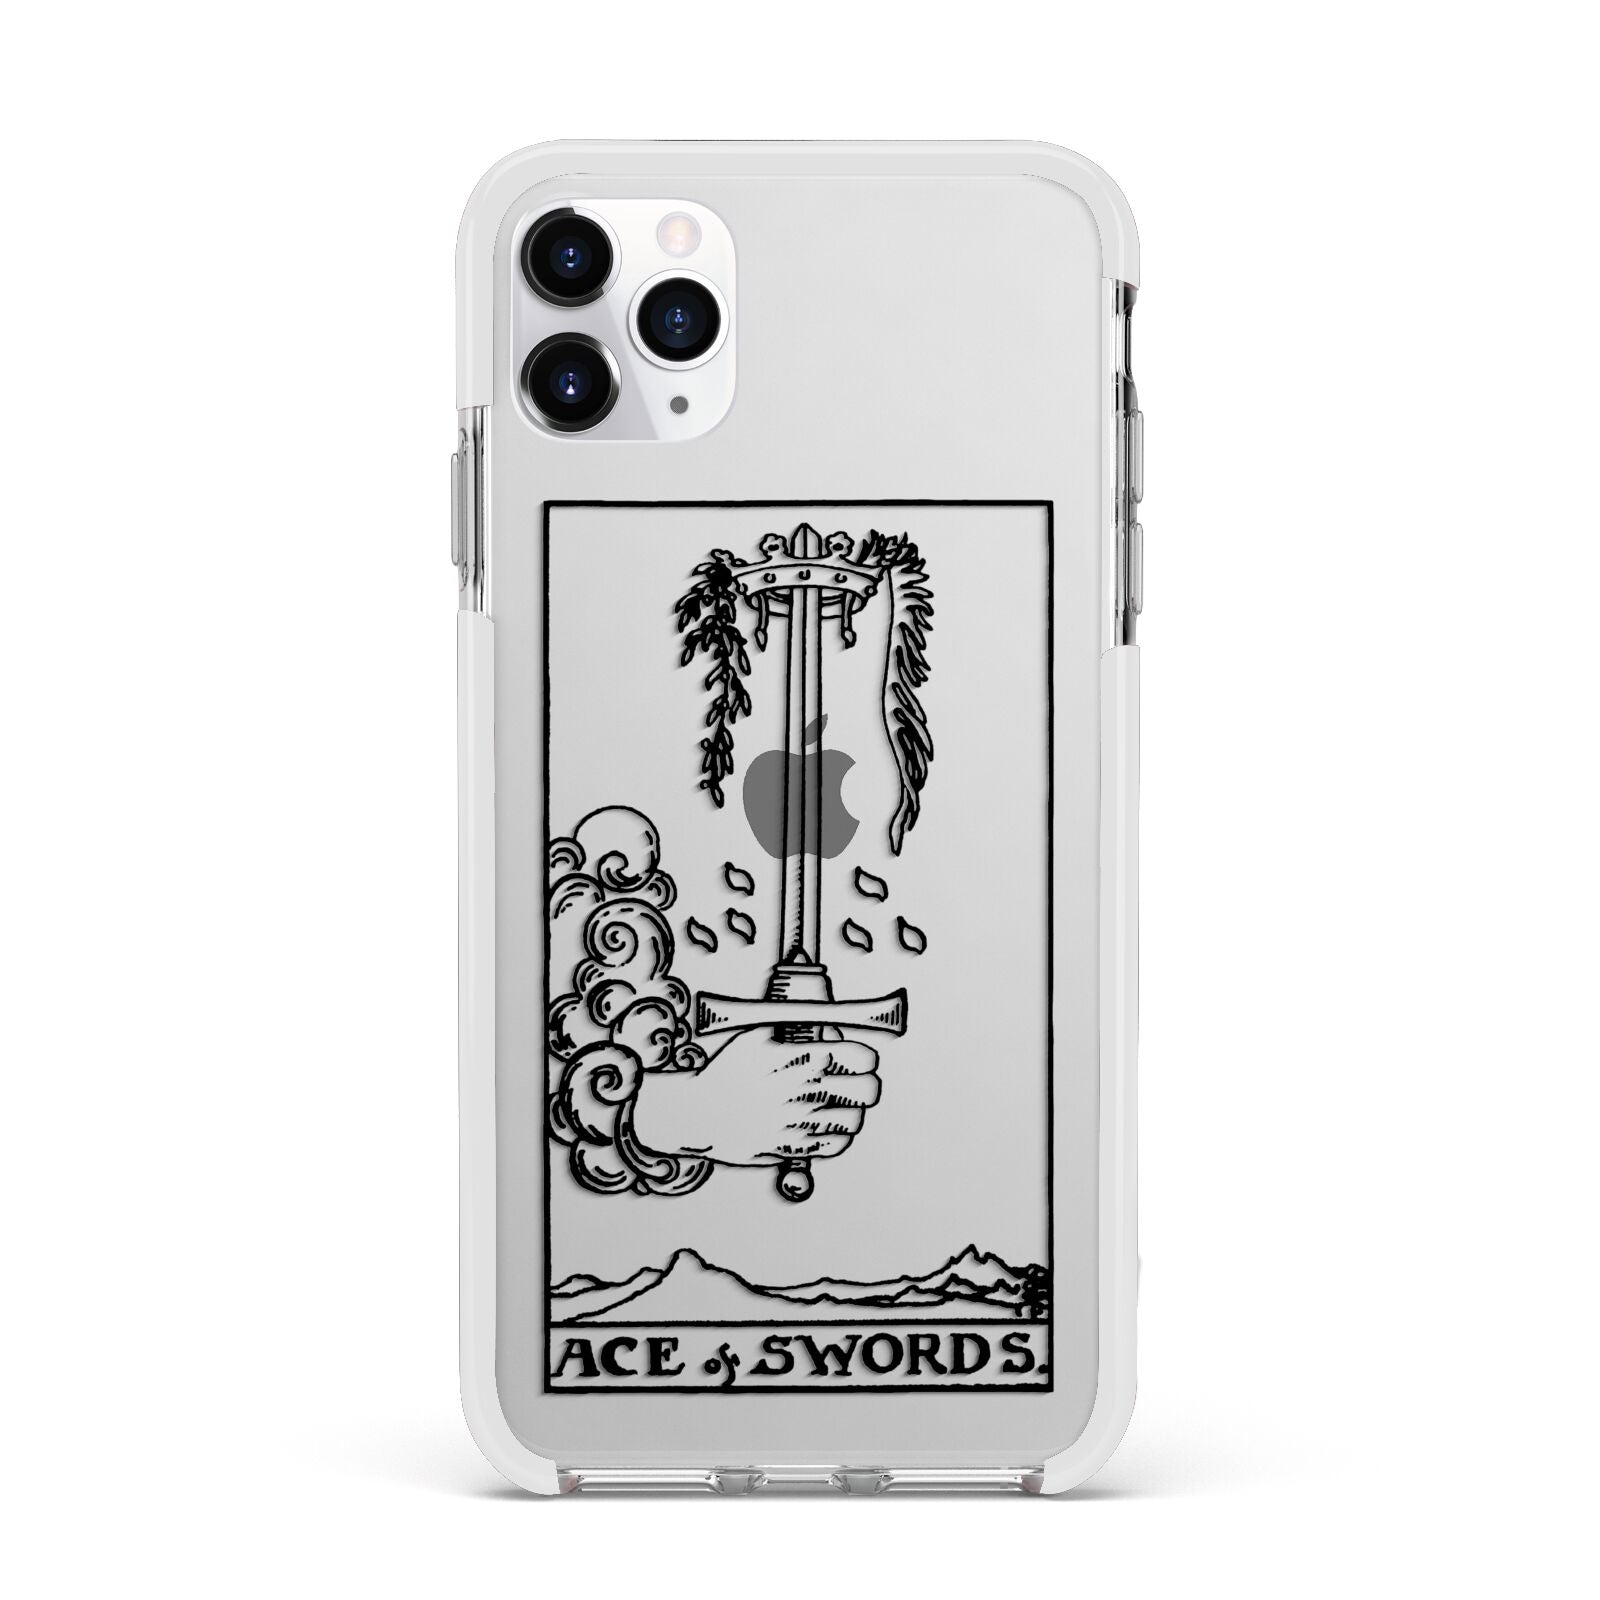 Ace of Swords Monochrome Apple iPhone 11 Pro Max in Silver with White Impact Case